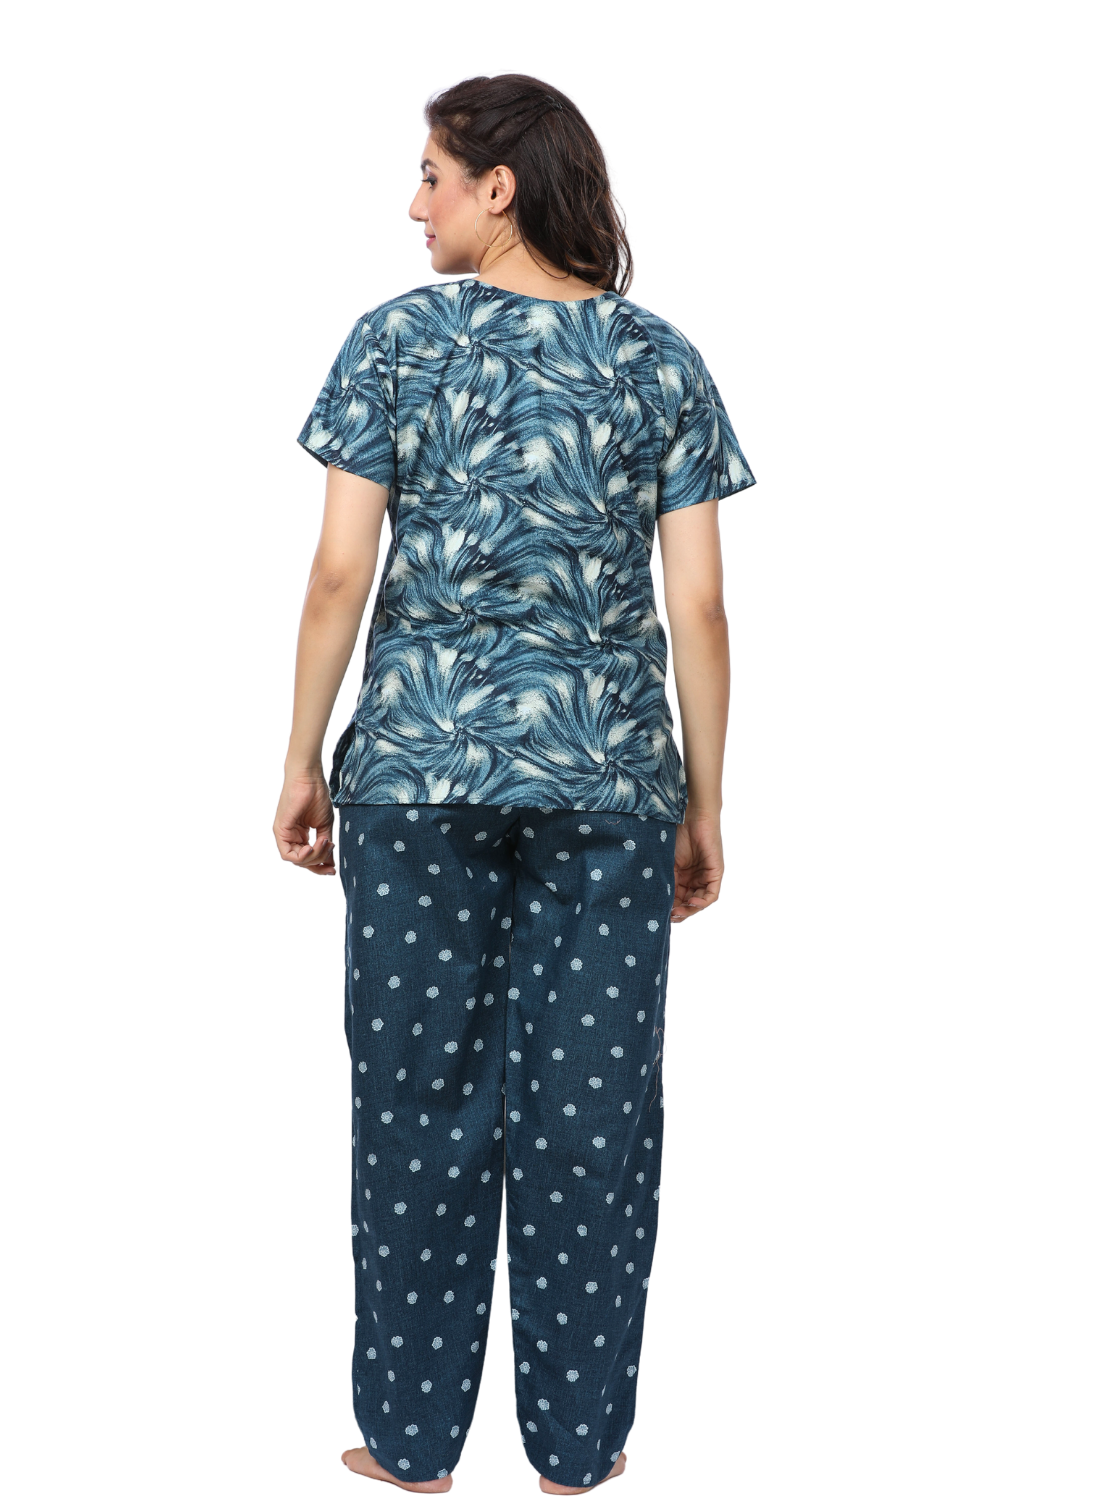 Printed Multiple Colors Satin Night Suit at Rs.400/Piece in mumbai offer by  Missimo Collection Pvt Ltd